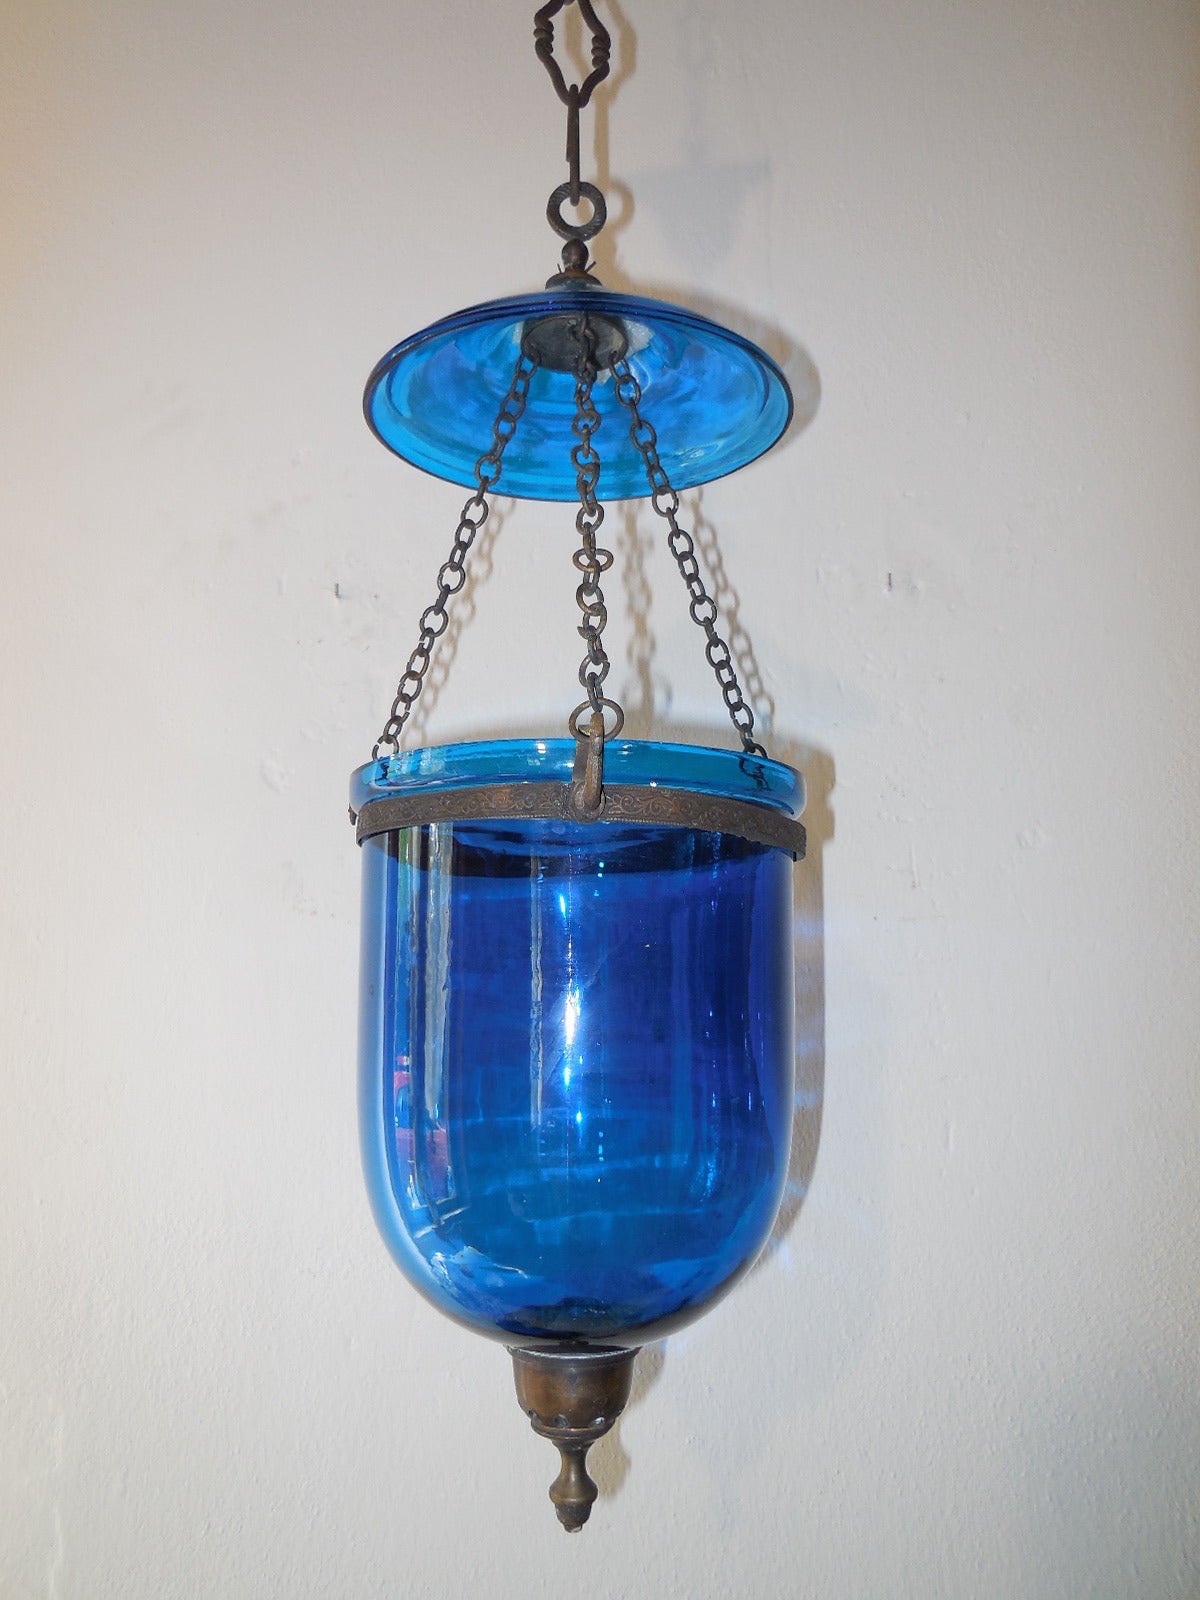 Rare cobalt color.  Bronze ornaments.  Made for candles from the 1800’s.  Adding 9” of original chain and canopy.  Free shipping from Italy.  Bell alone measures 10.5